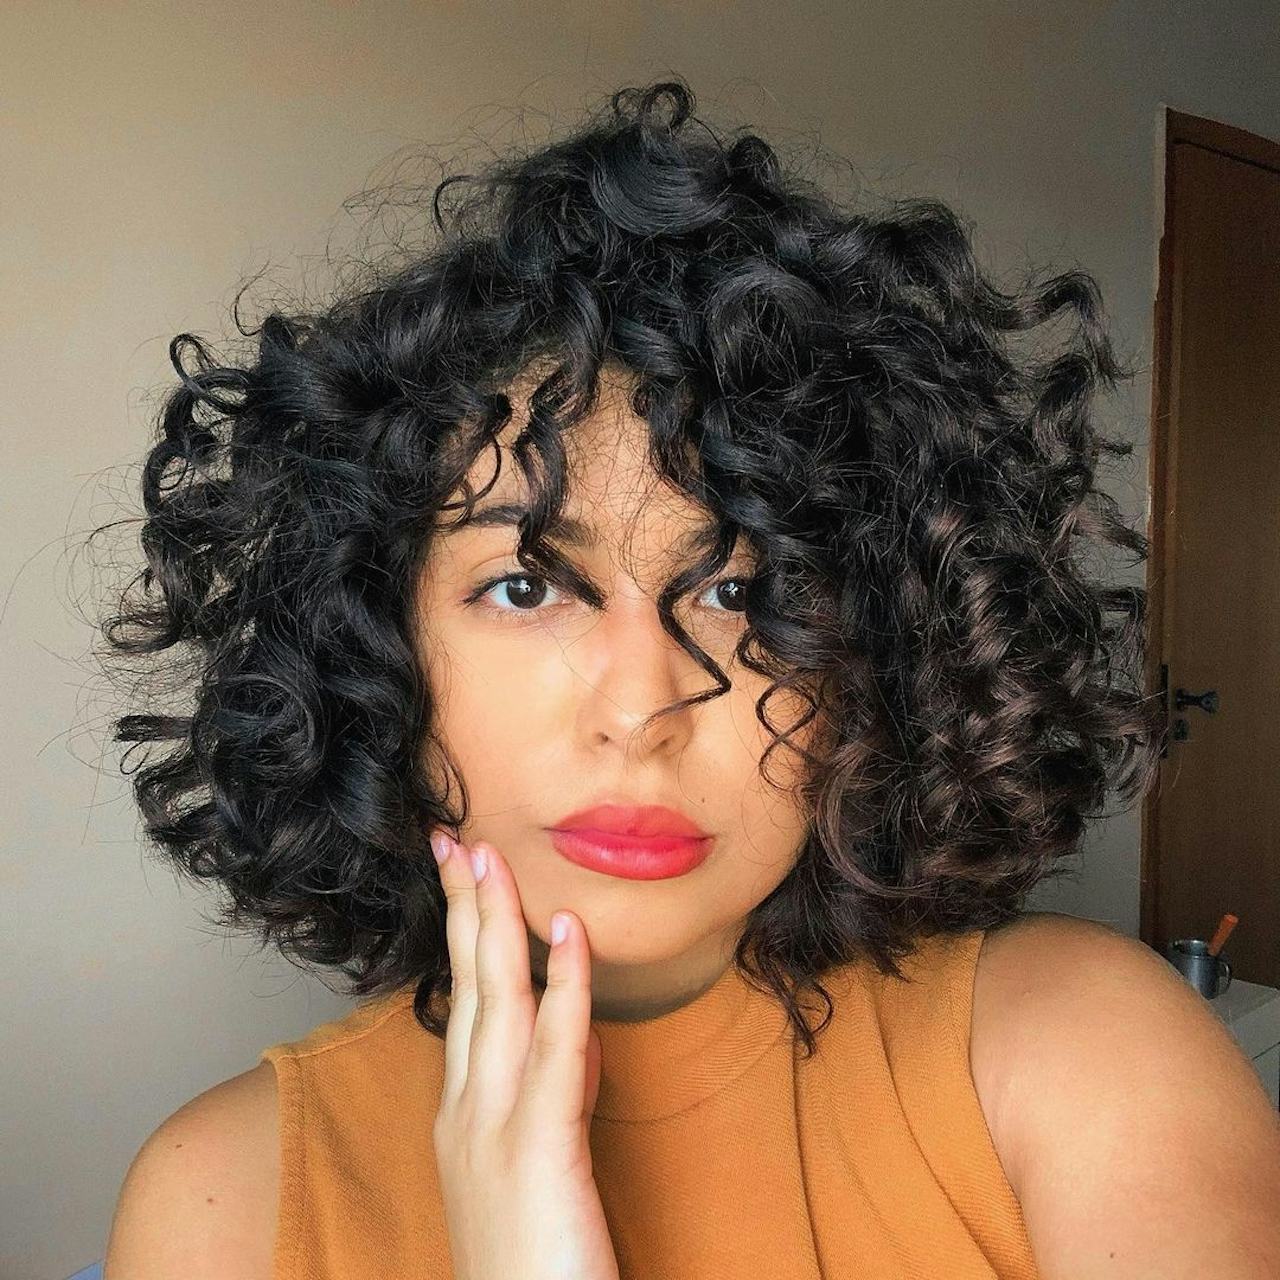 7 Short Curly Haircut Ideas For Spring 2022 If You're Craving A New Look